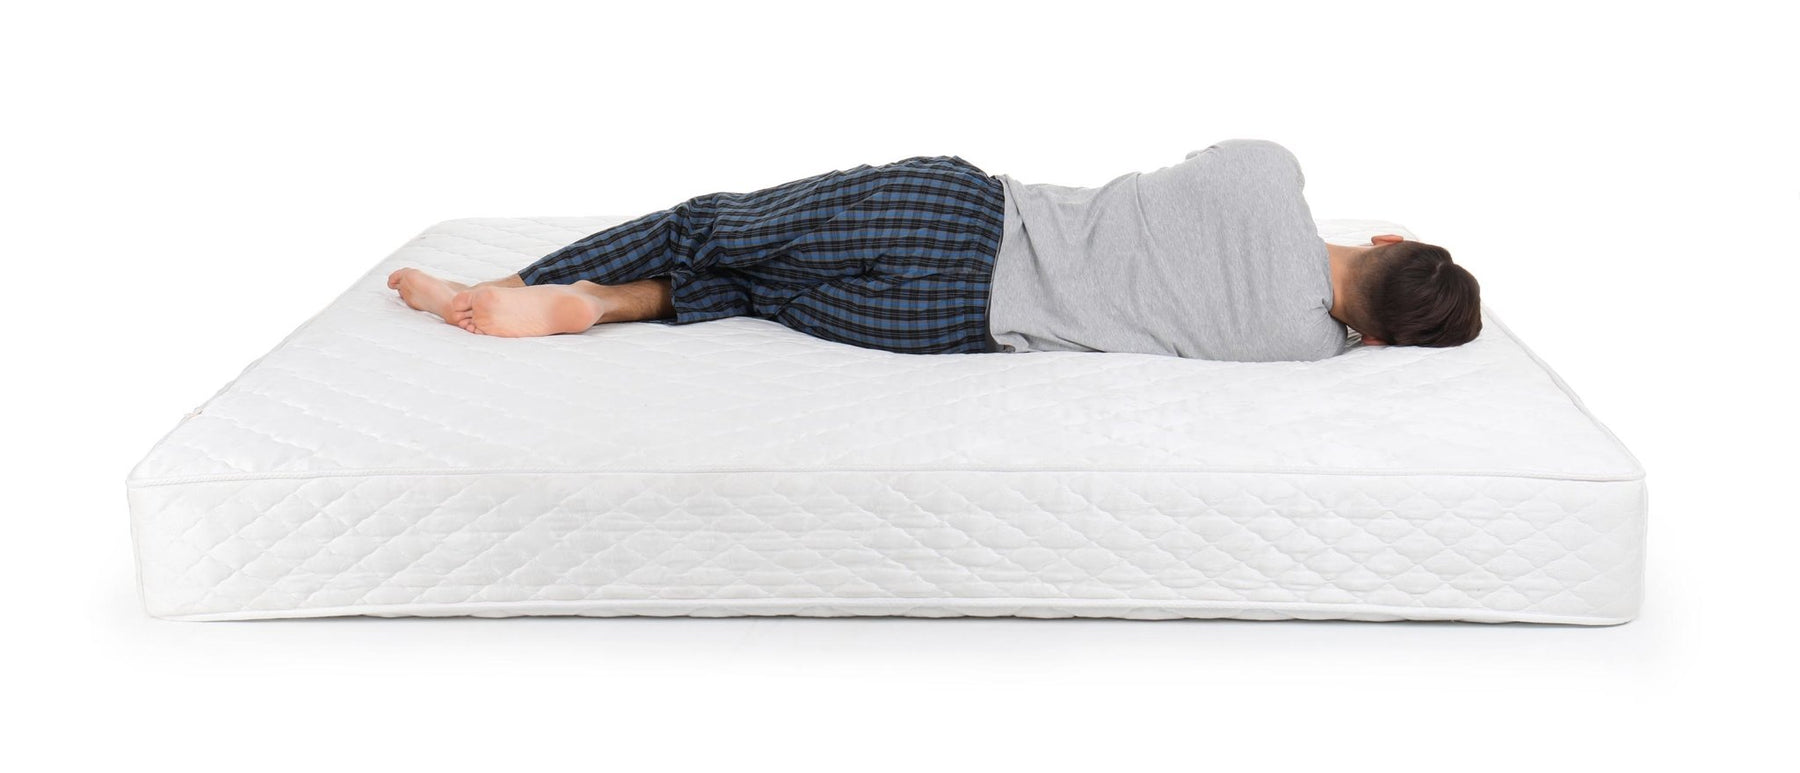 Getting the Right Thickness of a Memory Foam Mattress